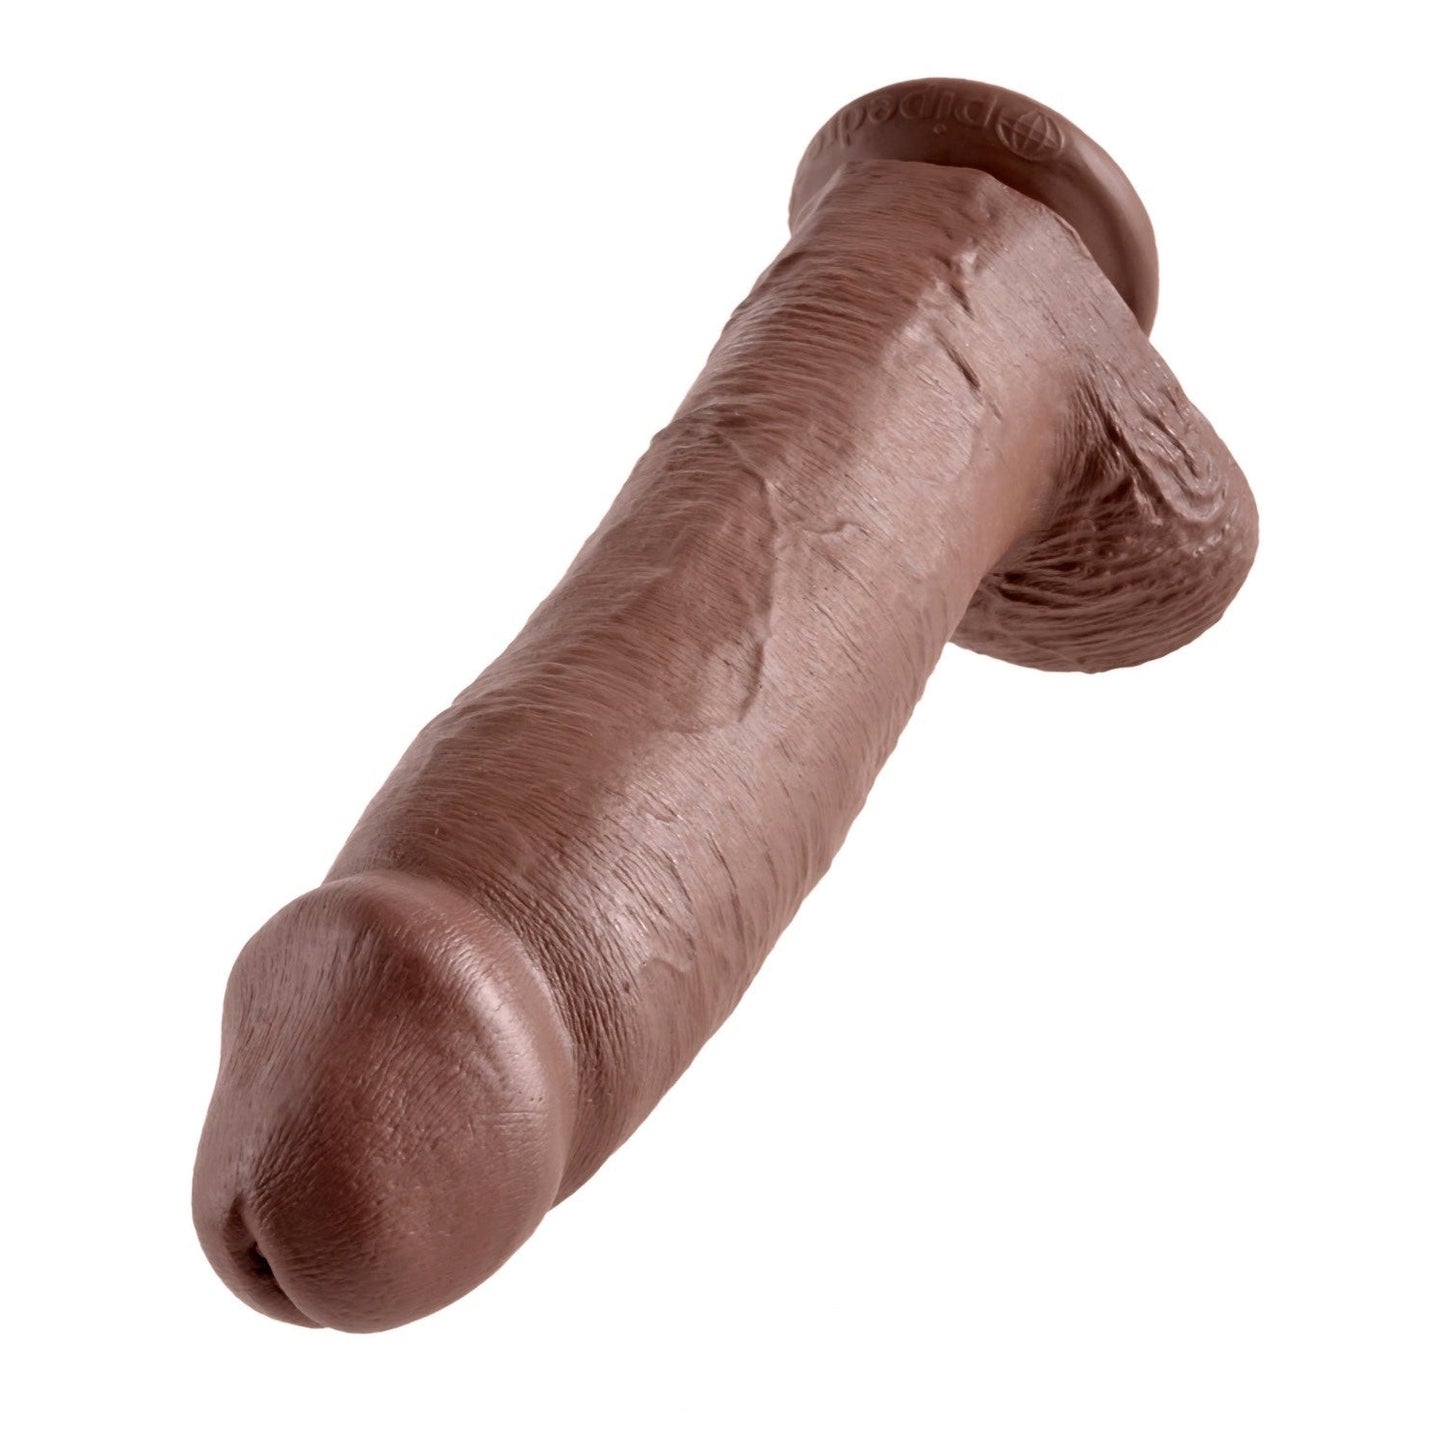 12" Cock With Balls - Brown 30.5 cm (12") Dong